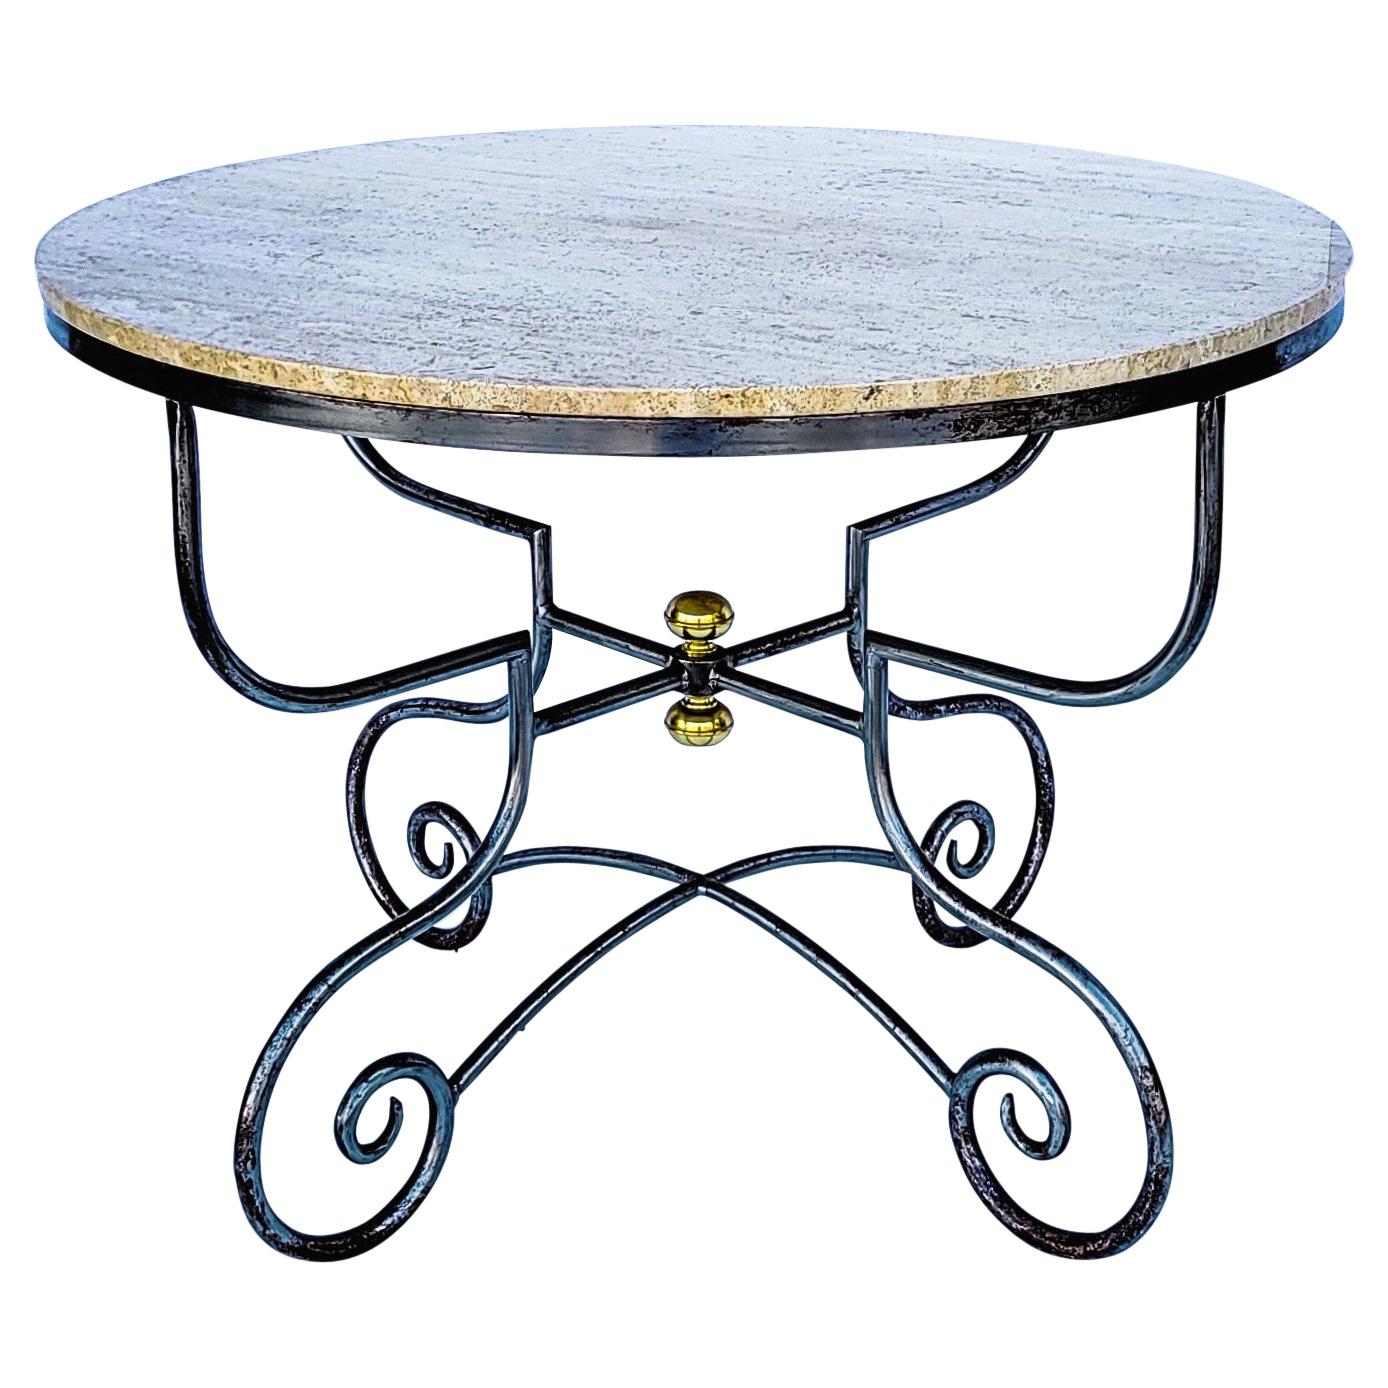 French Neo-Classical Style Steel, Brass and Stone Center or Dining Table